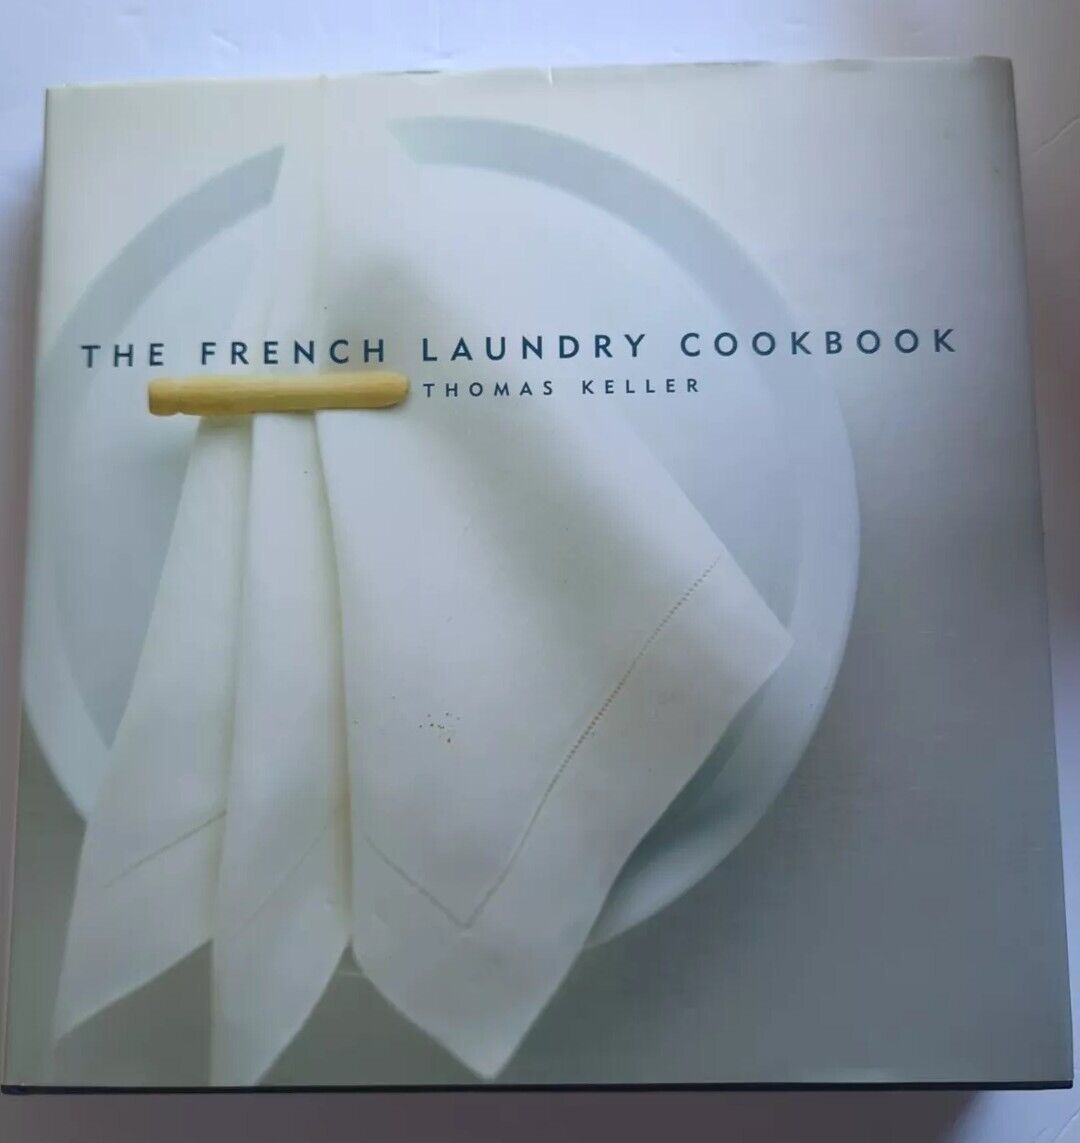 The Thomas Keller Library: The French Laundry Cookbook by Thomas Keller - VG